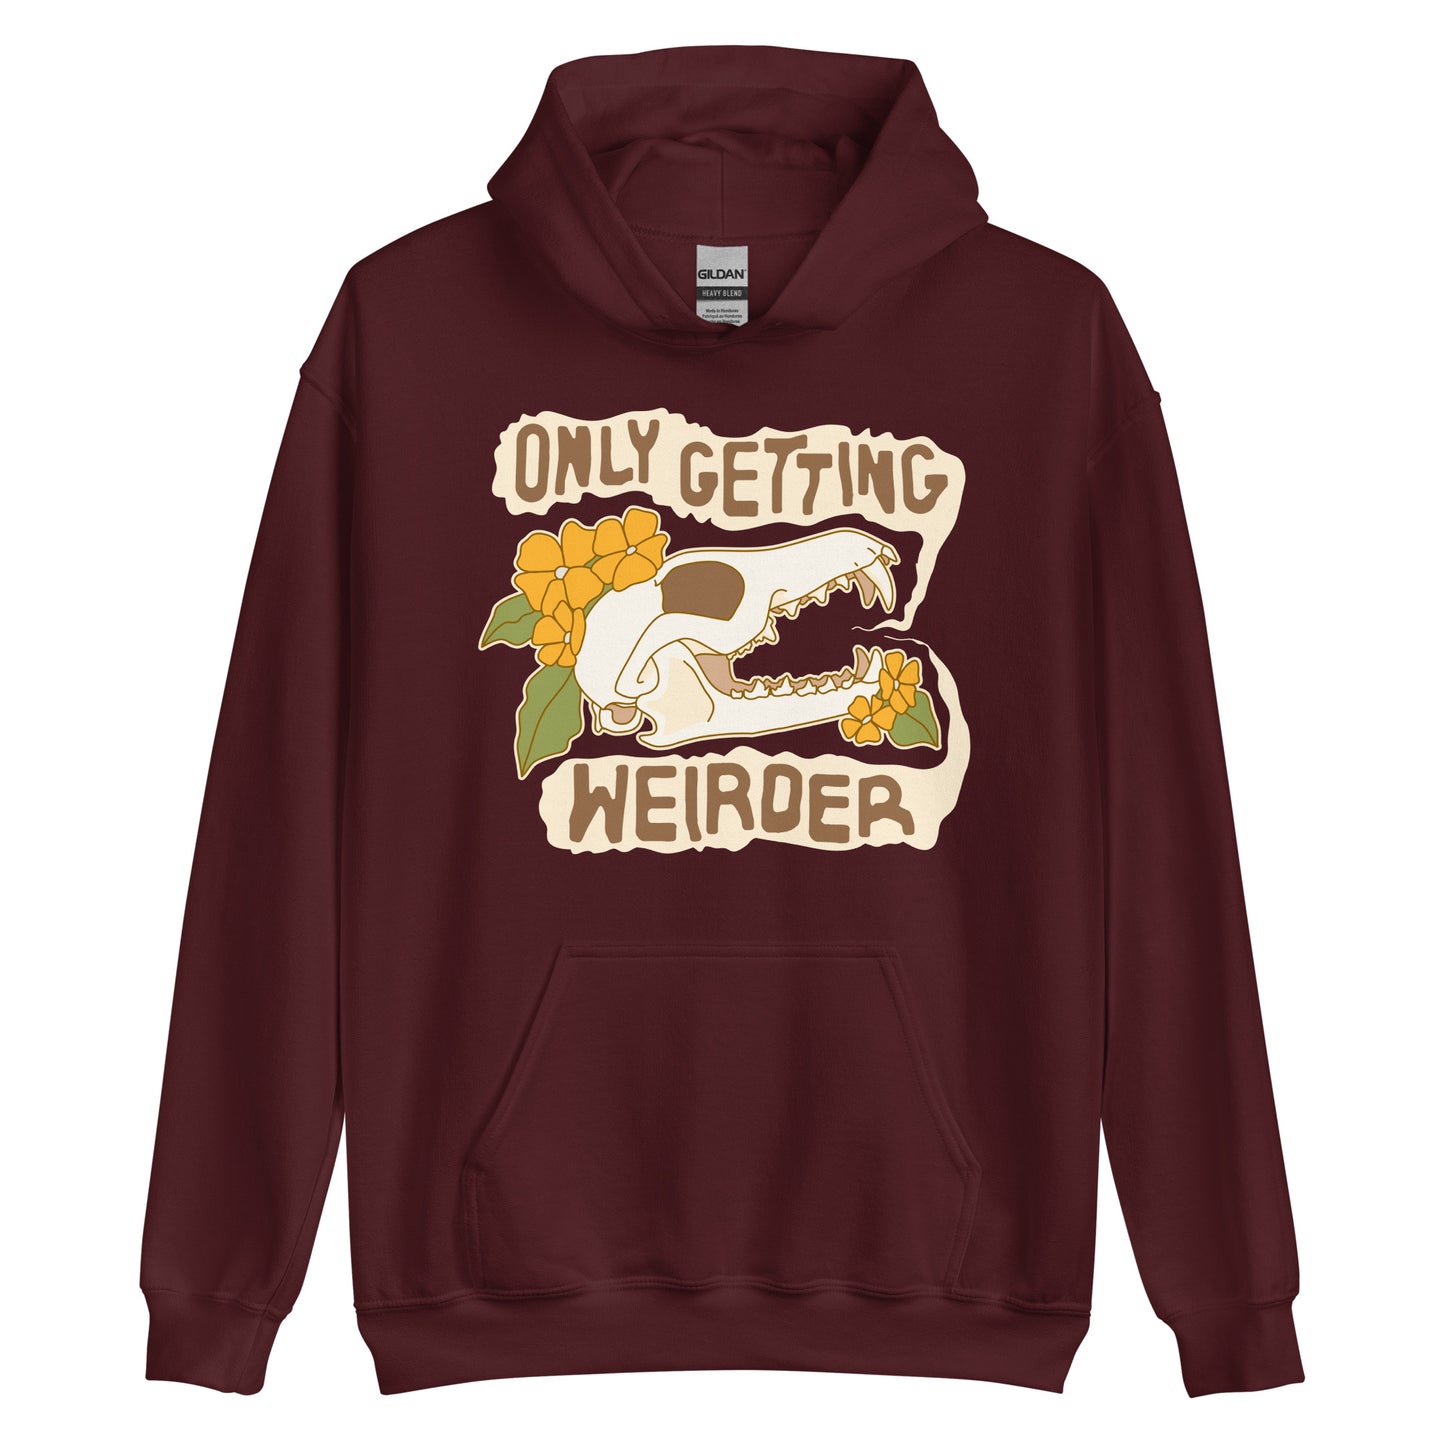 A maroon hooded sweatshirt featuring an illustration of a fox skull surrounded by yellow flowers. Wobbly speech bubbles are coming from the fox's mouth. The text inside the bubbles reads "ONLY GETTING WEIRDER".